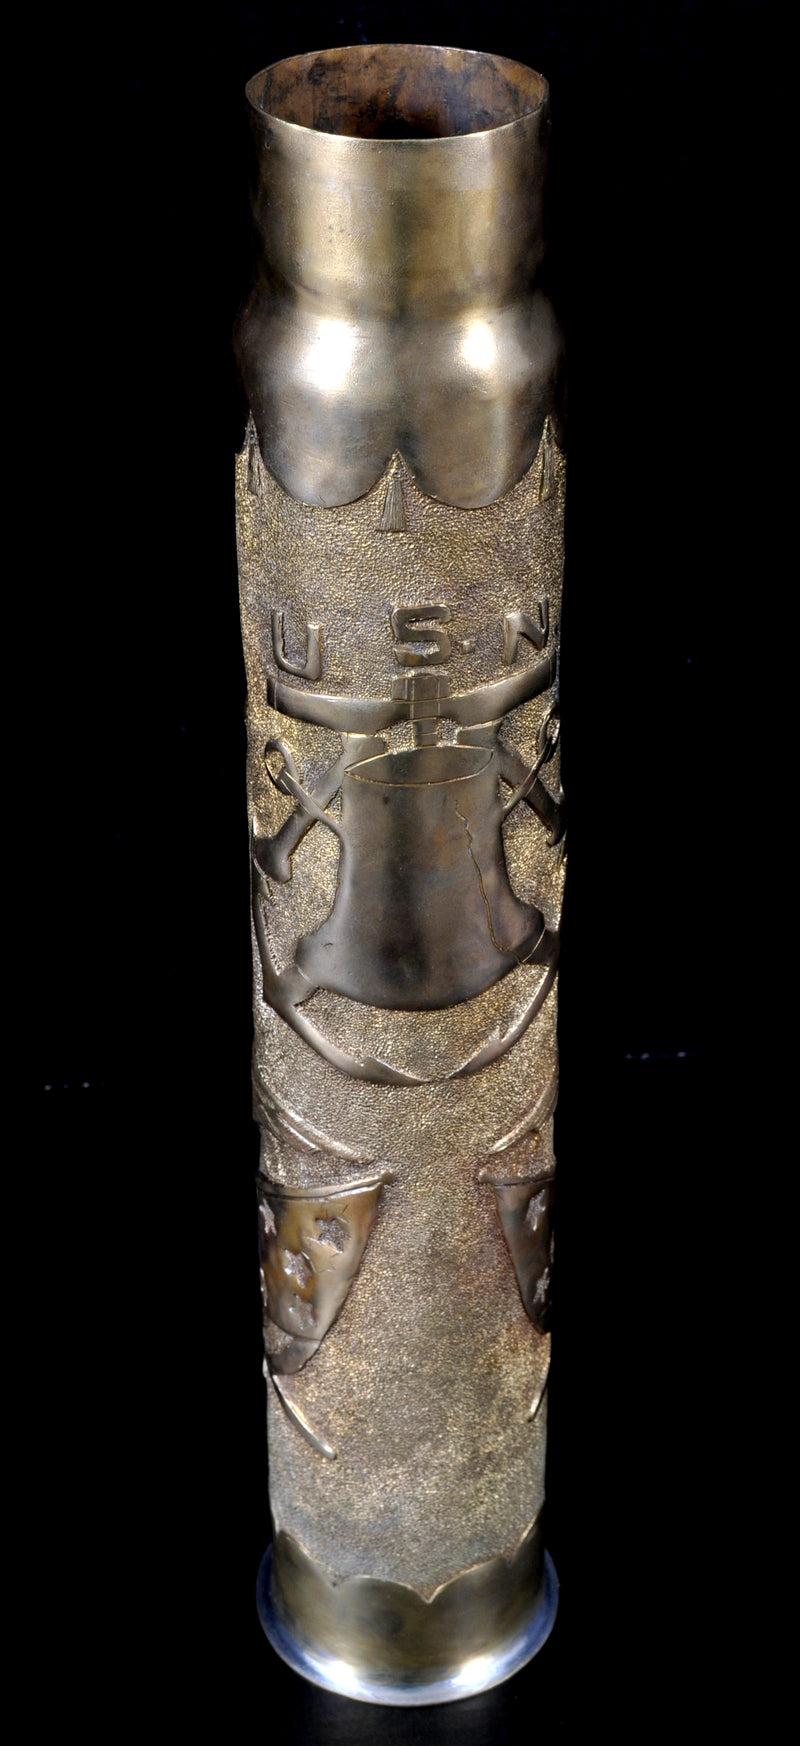 Antique US Navy Artillery Shell/Trench Art From Spanish American War, Circa 1898